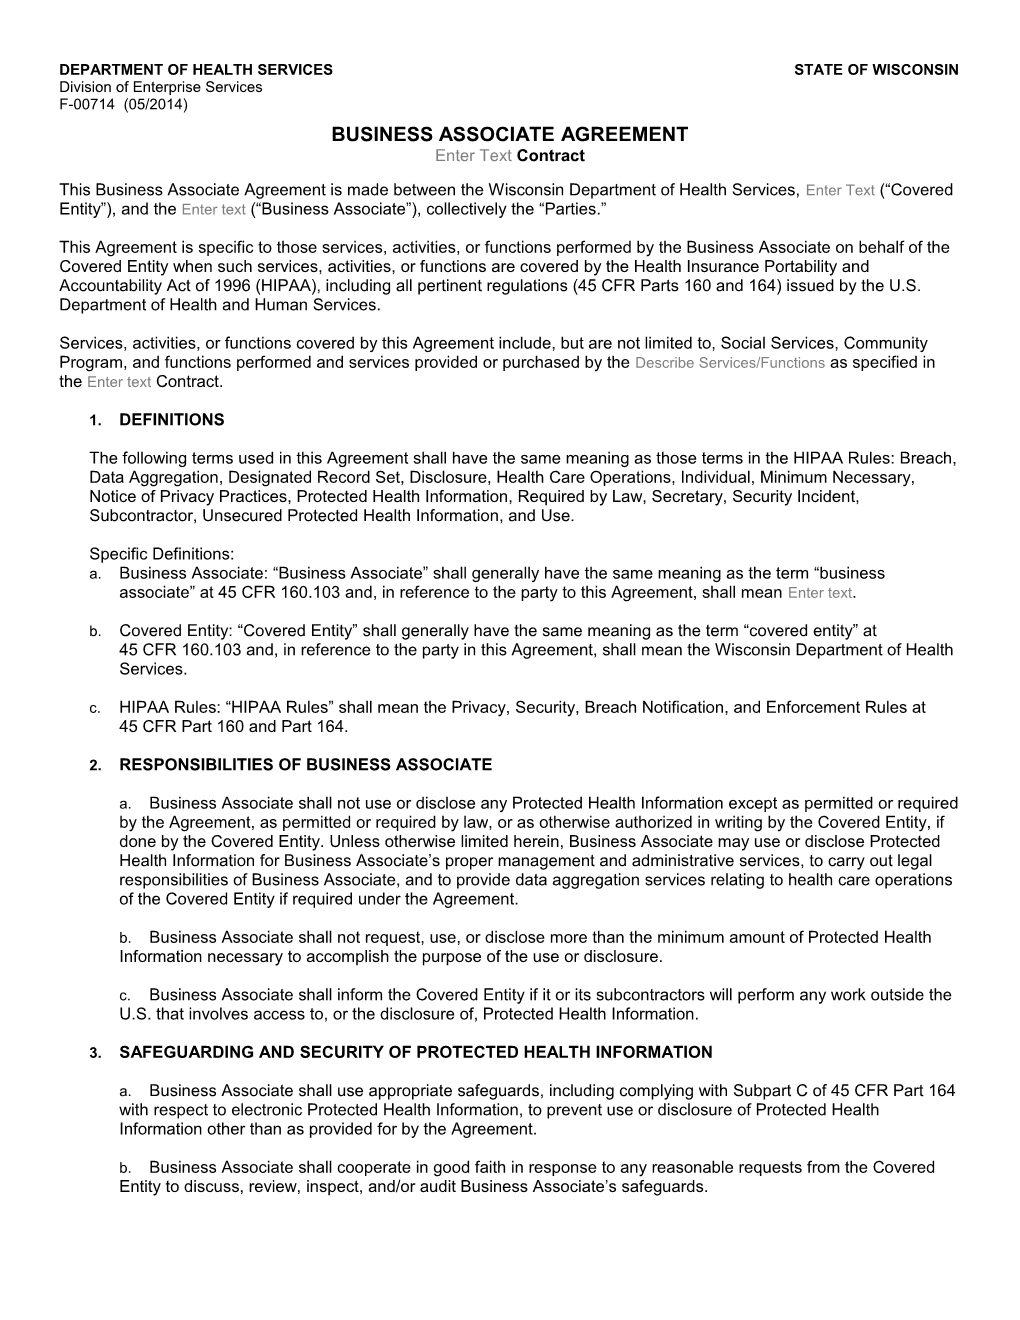 Business Associate Agreement - City / County Contract